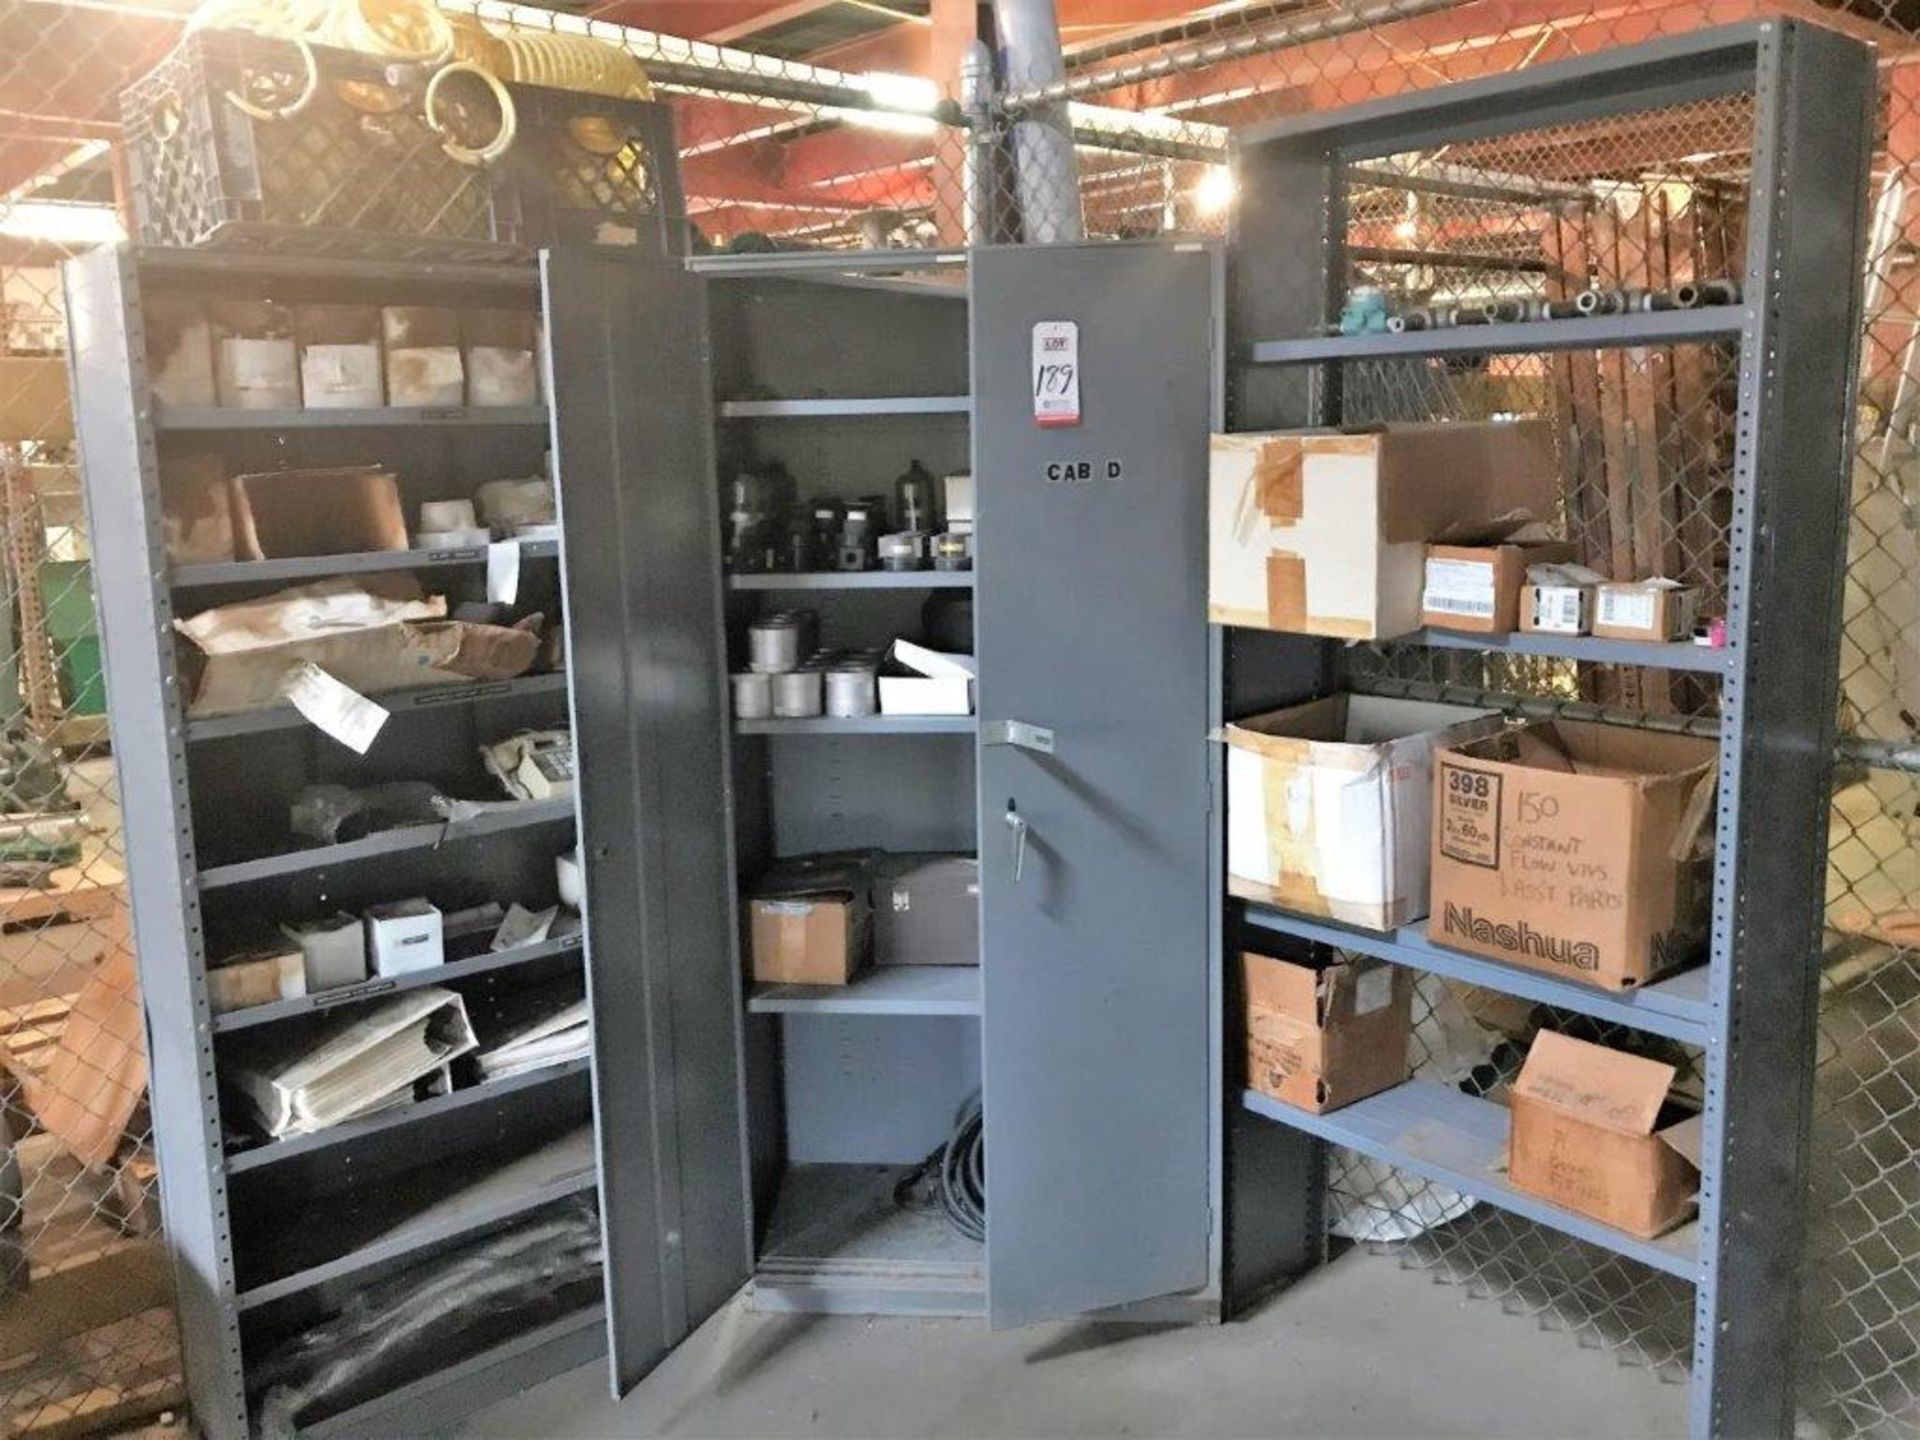 LOT - (2) 2-DOOR CABINETS AND (2) SHELVING UNITS, W/ CONTENTS OF ASSORTED REG./FILTER PARTS, AIR